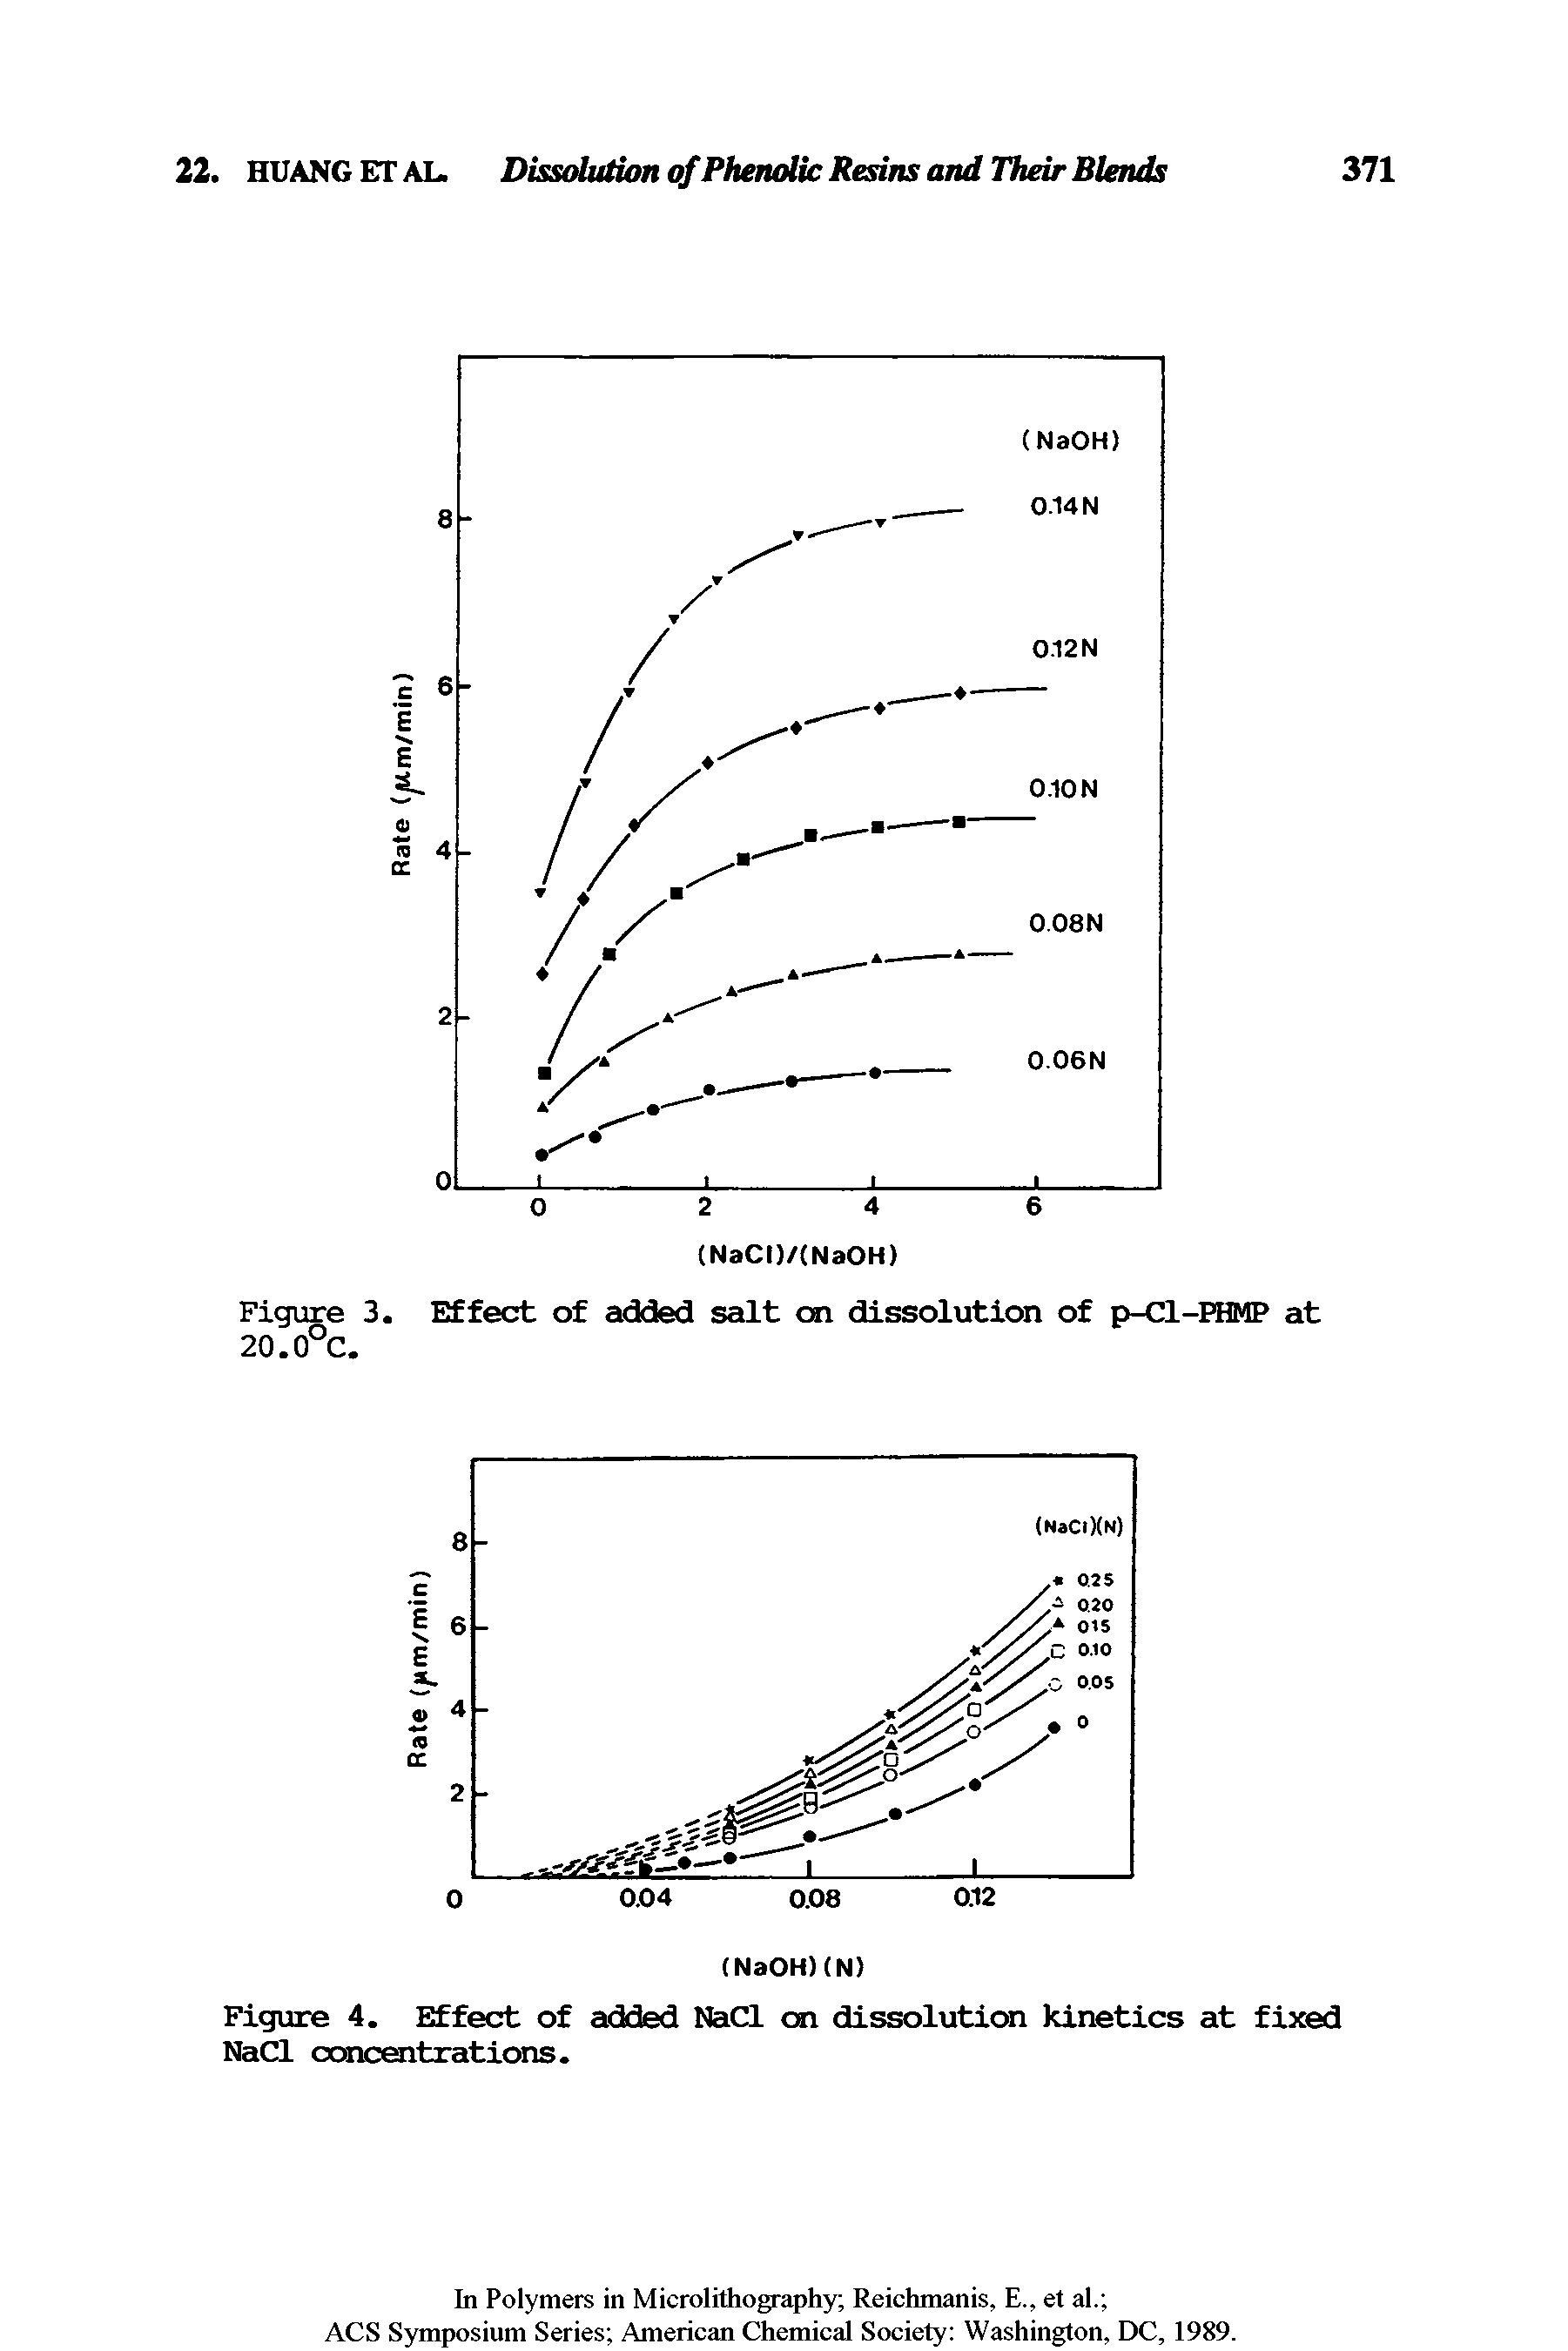 Figure 4. Effect of added NaCl on dissolution kinetics at fixed NaCl concentrations.